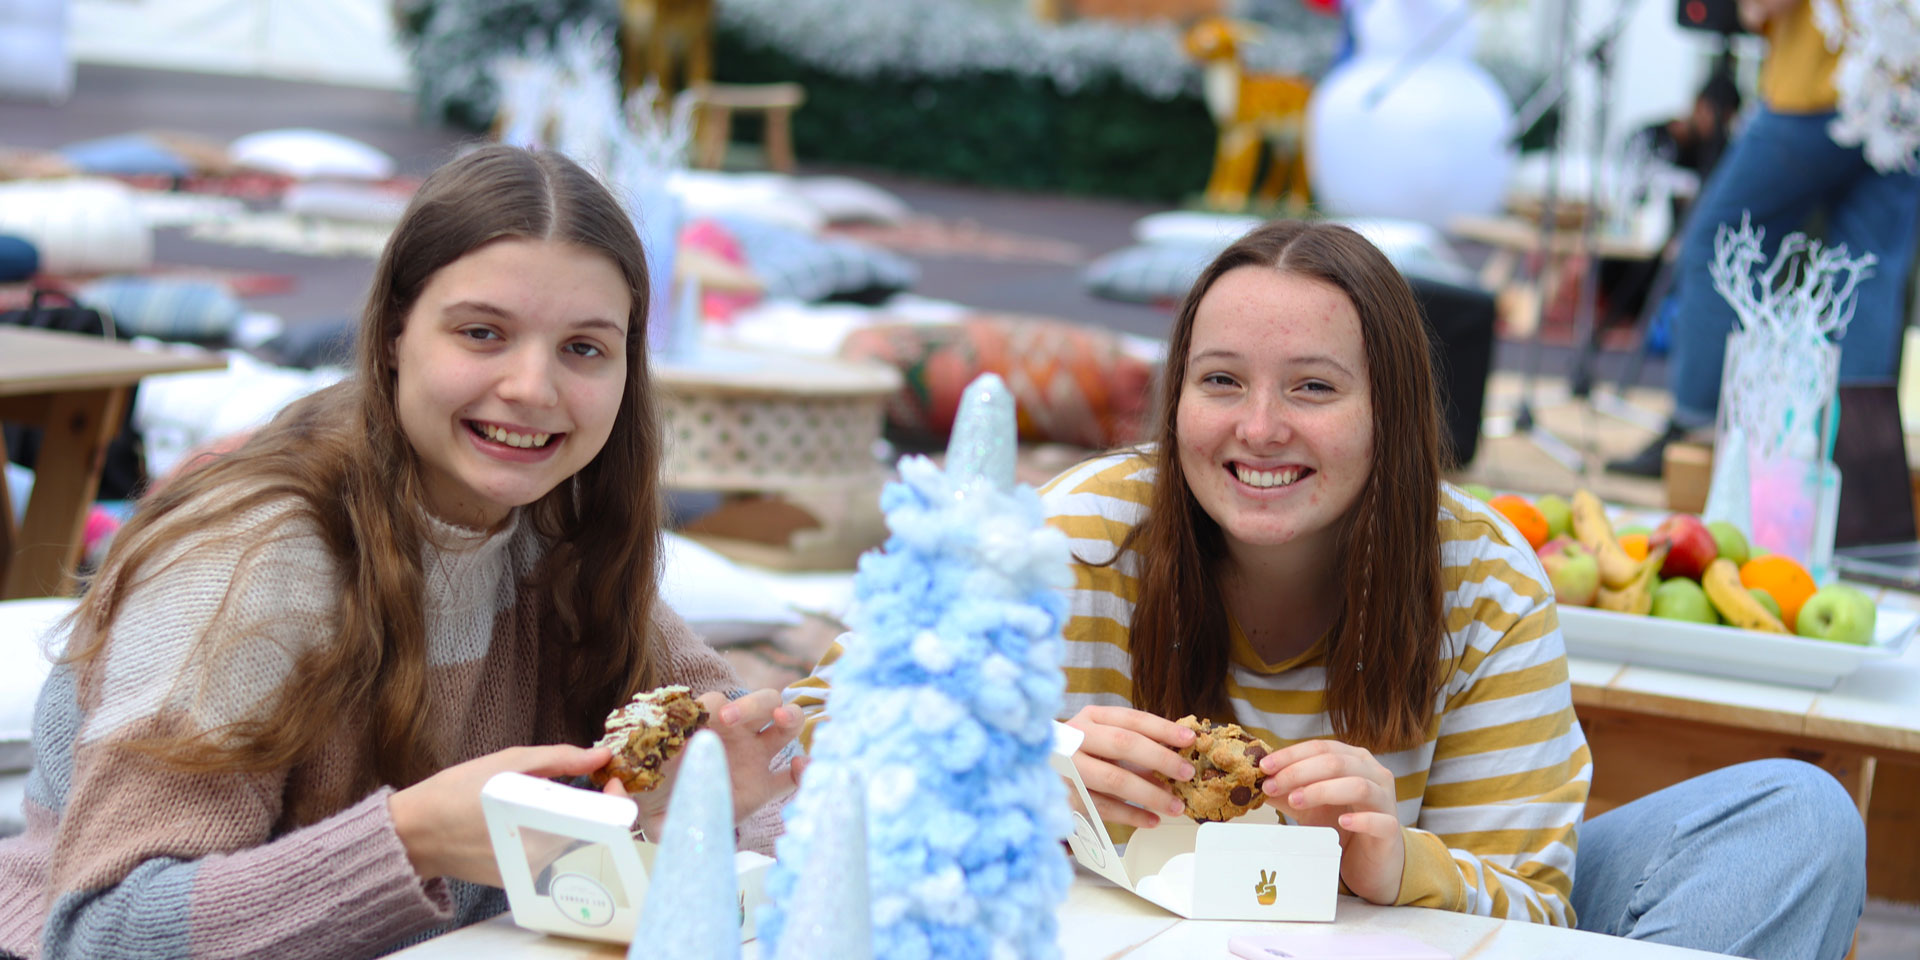 Two students sitting at a table filled with winter decorations. They smile at the camera.